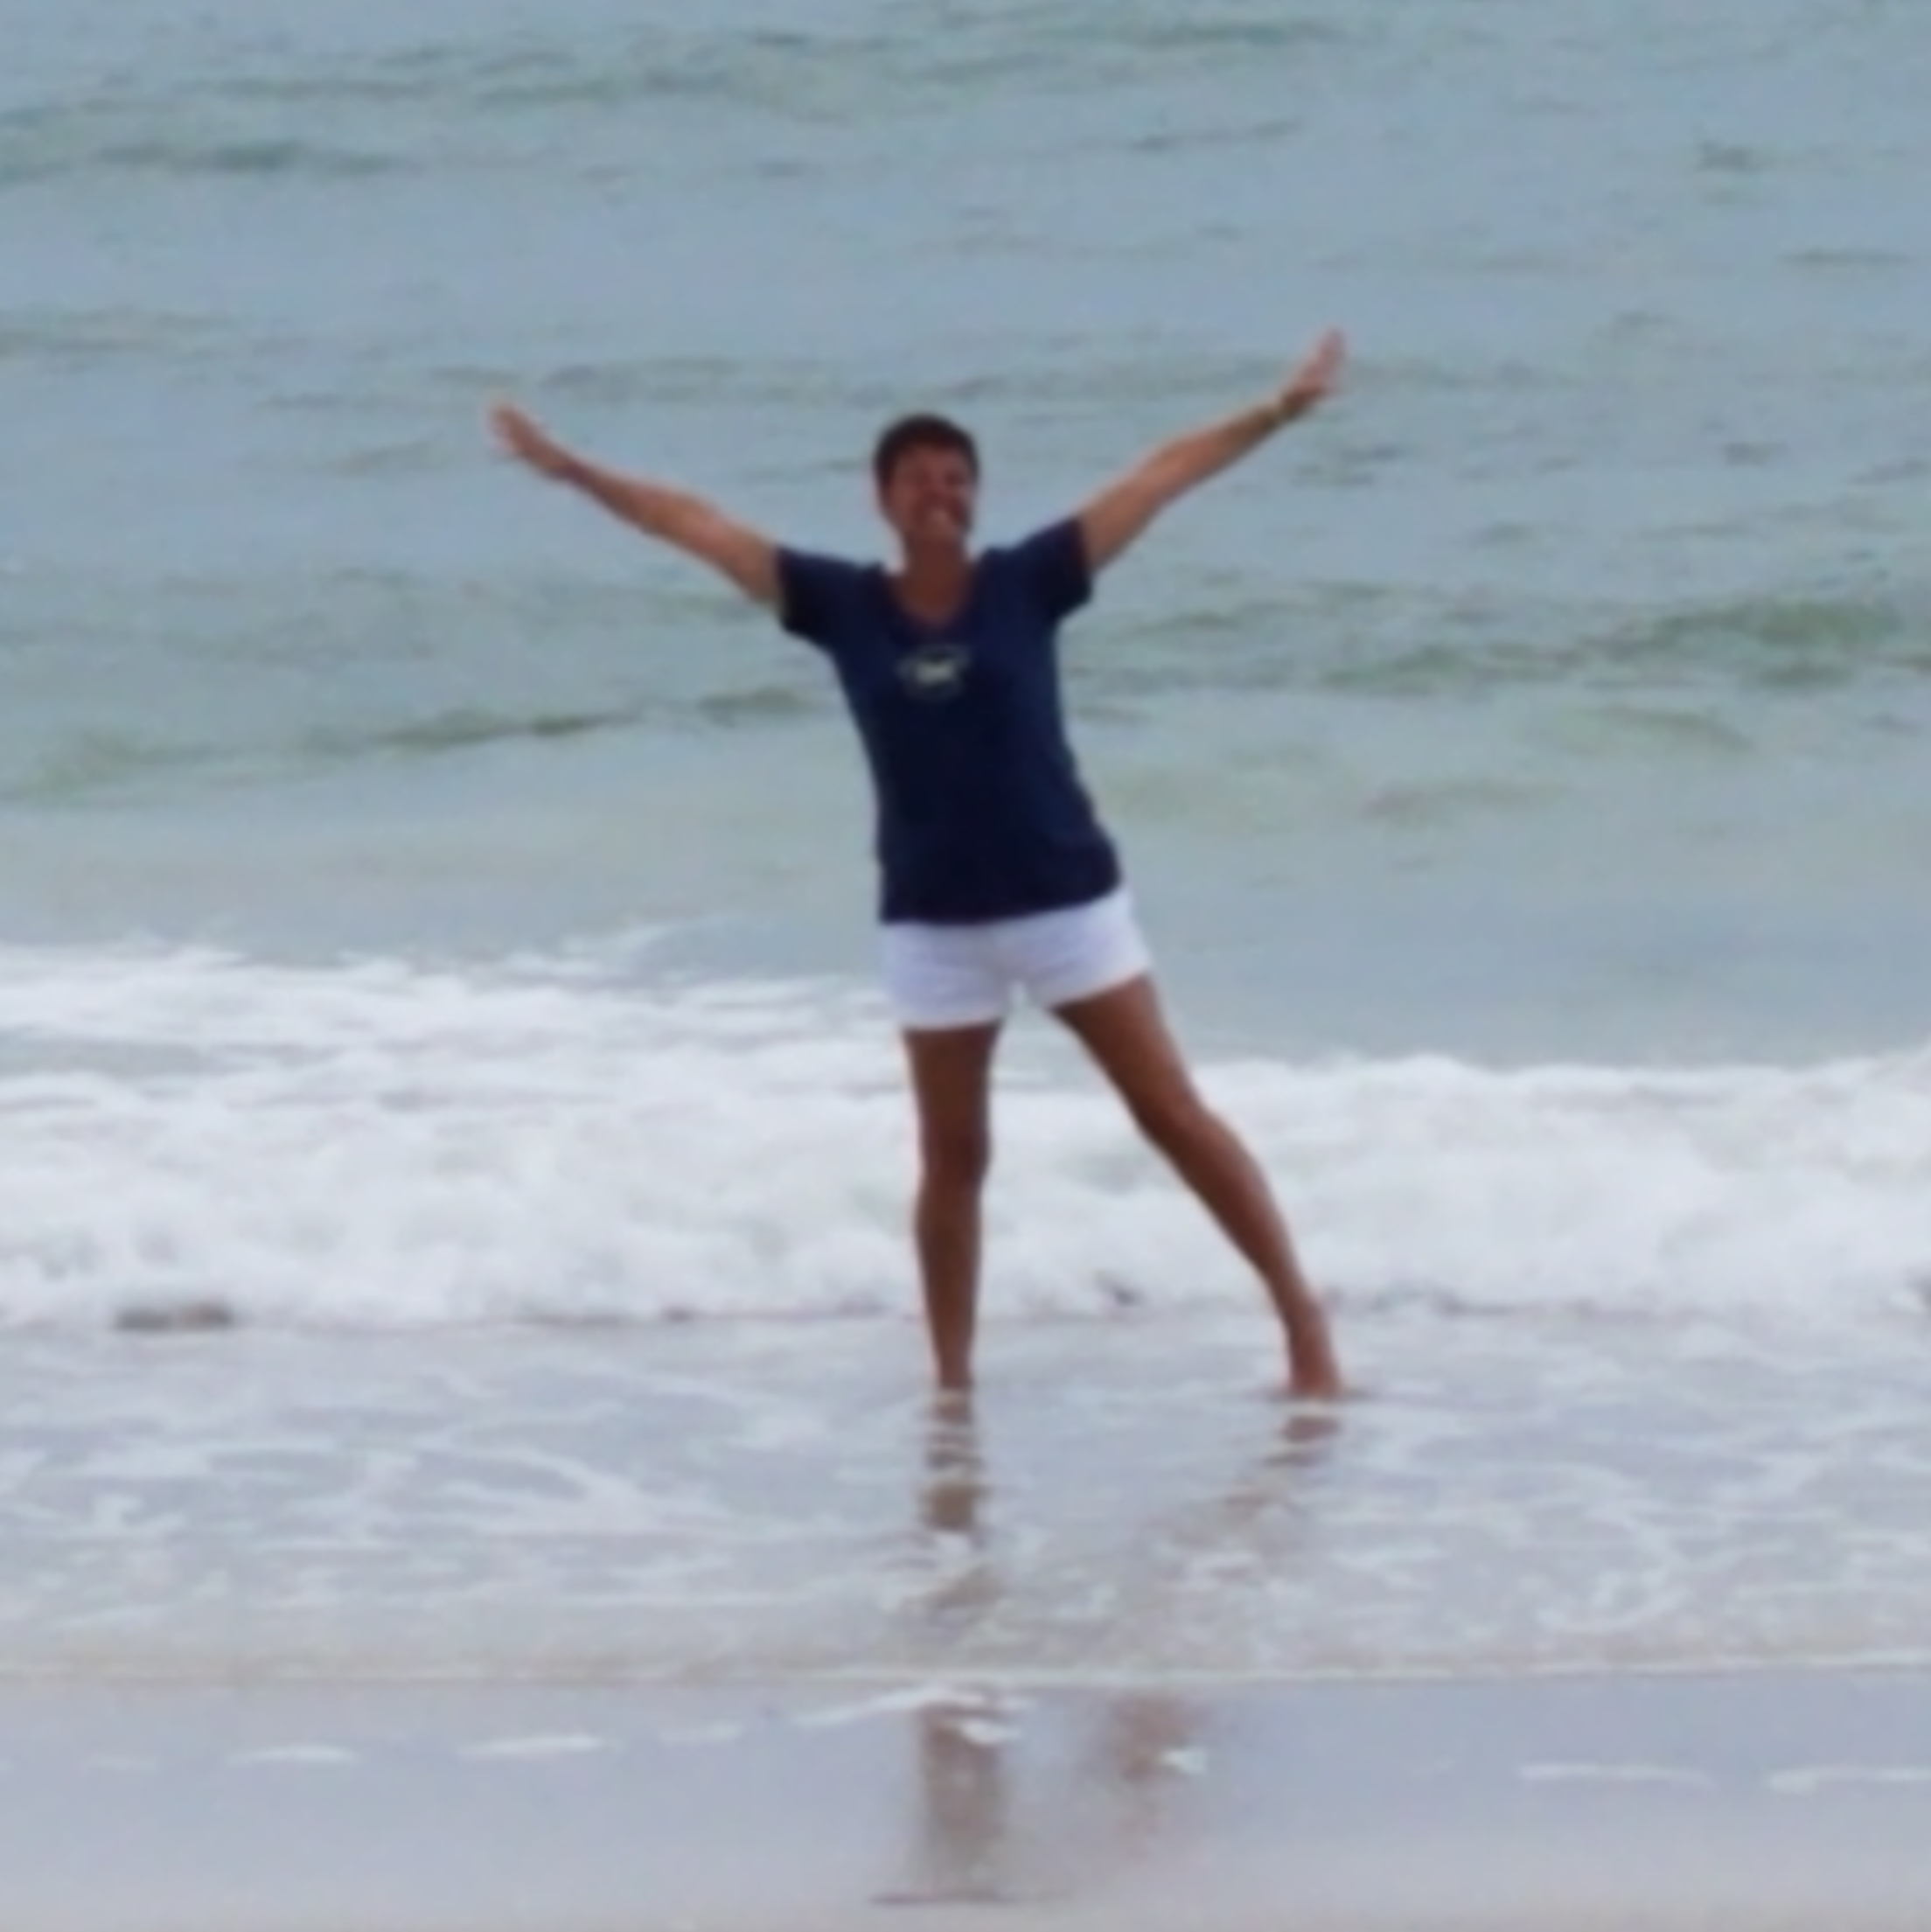 Sandi Smith standing on the beach with arms open like a Y and legs spread apart